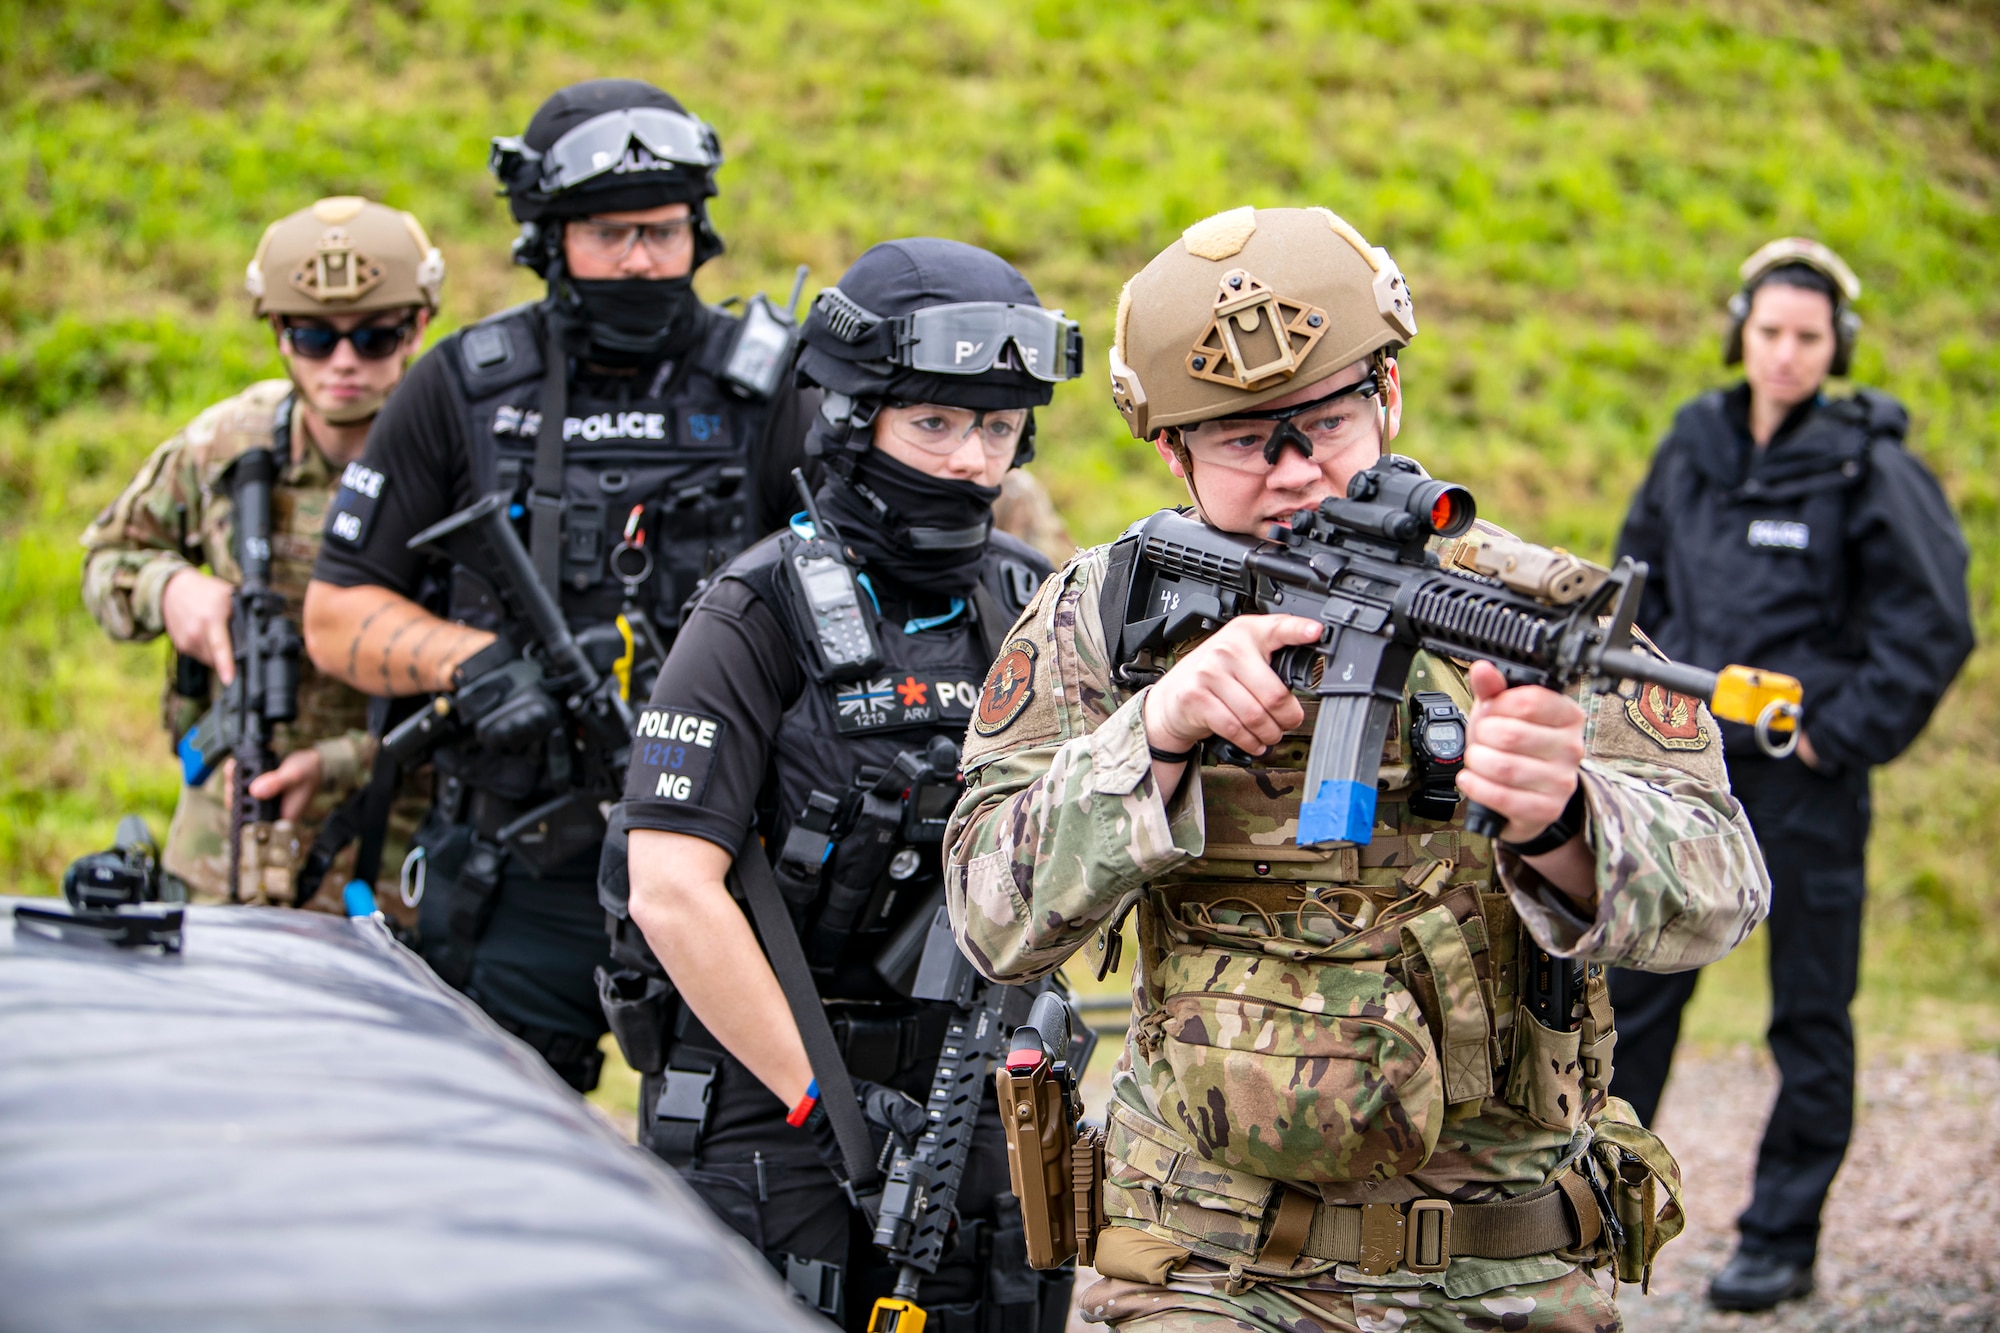 Airmen from the 422nd Security Forces Squadron, along with police officers from the Northamptonshire police department, advance their position during a tri-agency active shooter response exercise at RAF Croughton, England, June 30, 2021. Airmen from the 422nd SFS along with police officers from the NHPD and Ministry of Defense, participated in multiple exercises to enhance their search and seizure tactics, strengthen local ties and gain rapport with their fellow officers. (U.S. Air Force photo by Senior Airman Eugene Oliver)